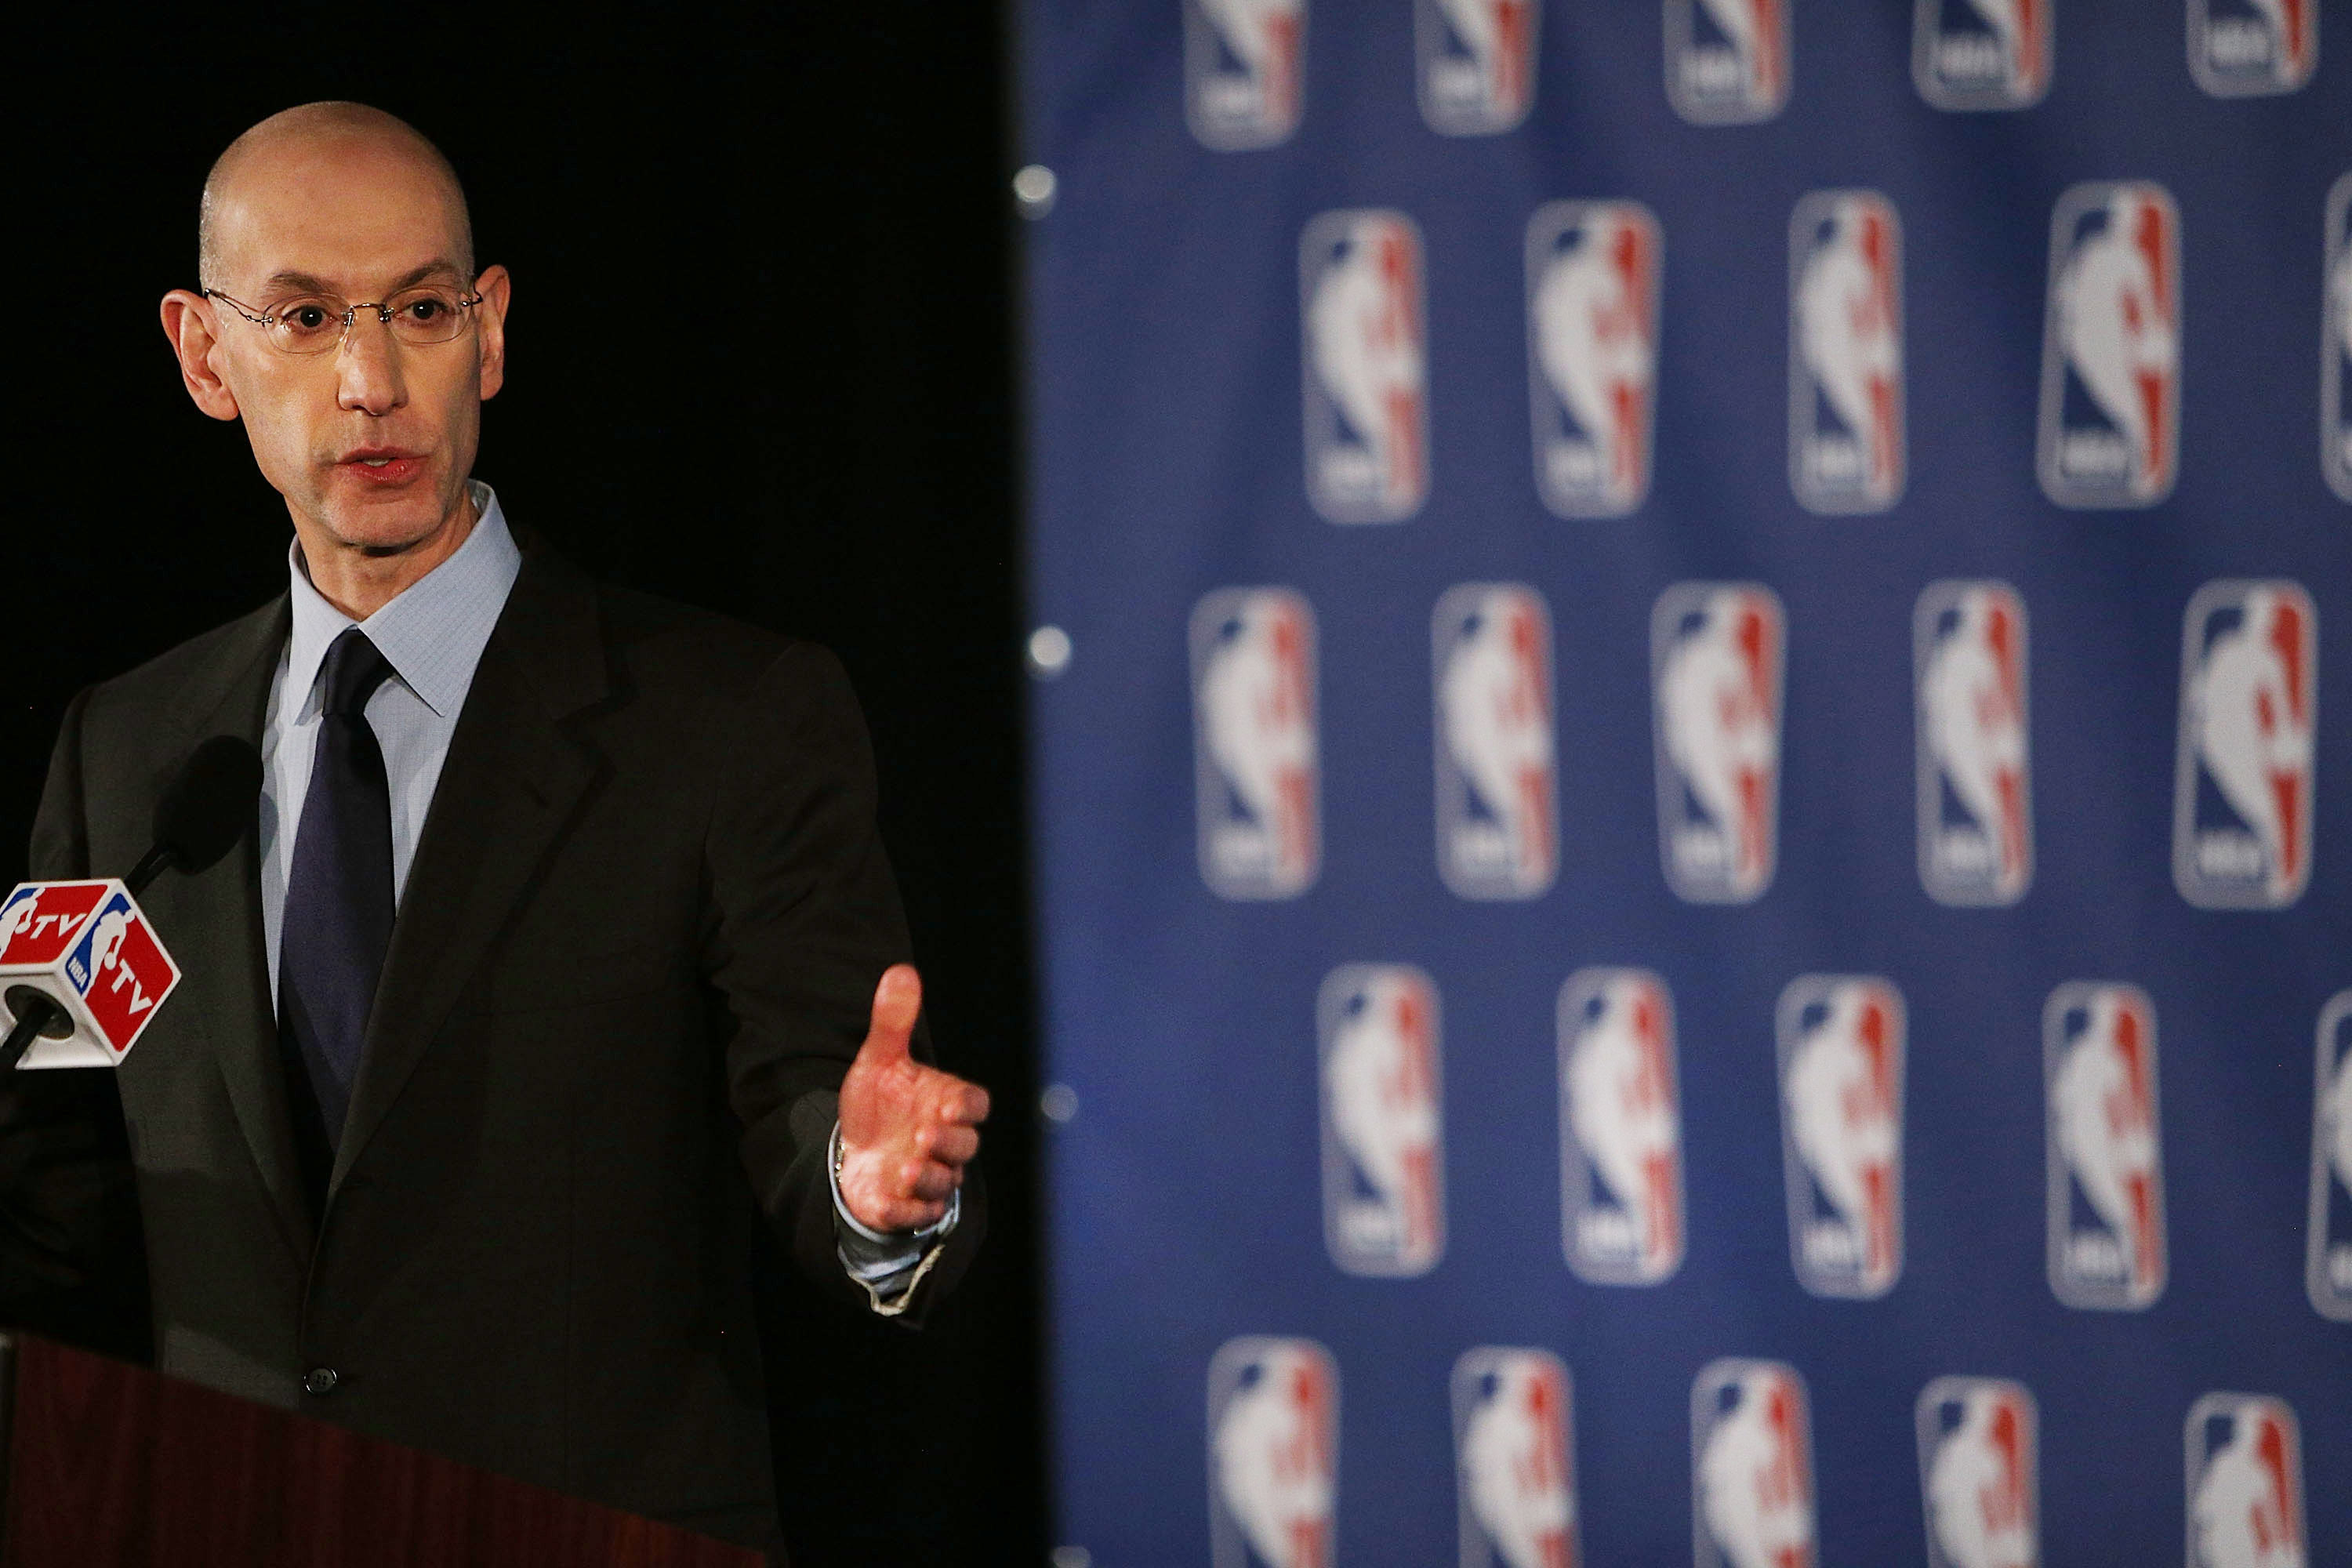 NBA Commissioner Adam Silver addresses the media about the investigation involving Los Angeles Clippers owner Donald Sterling and accusations that he made racist remarks to a girlfriend on April 29, 2014 in New York City. (Spencer Platt—Getty Images)